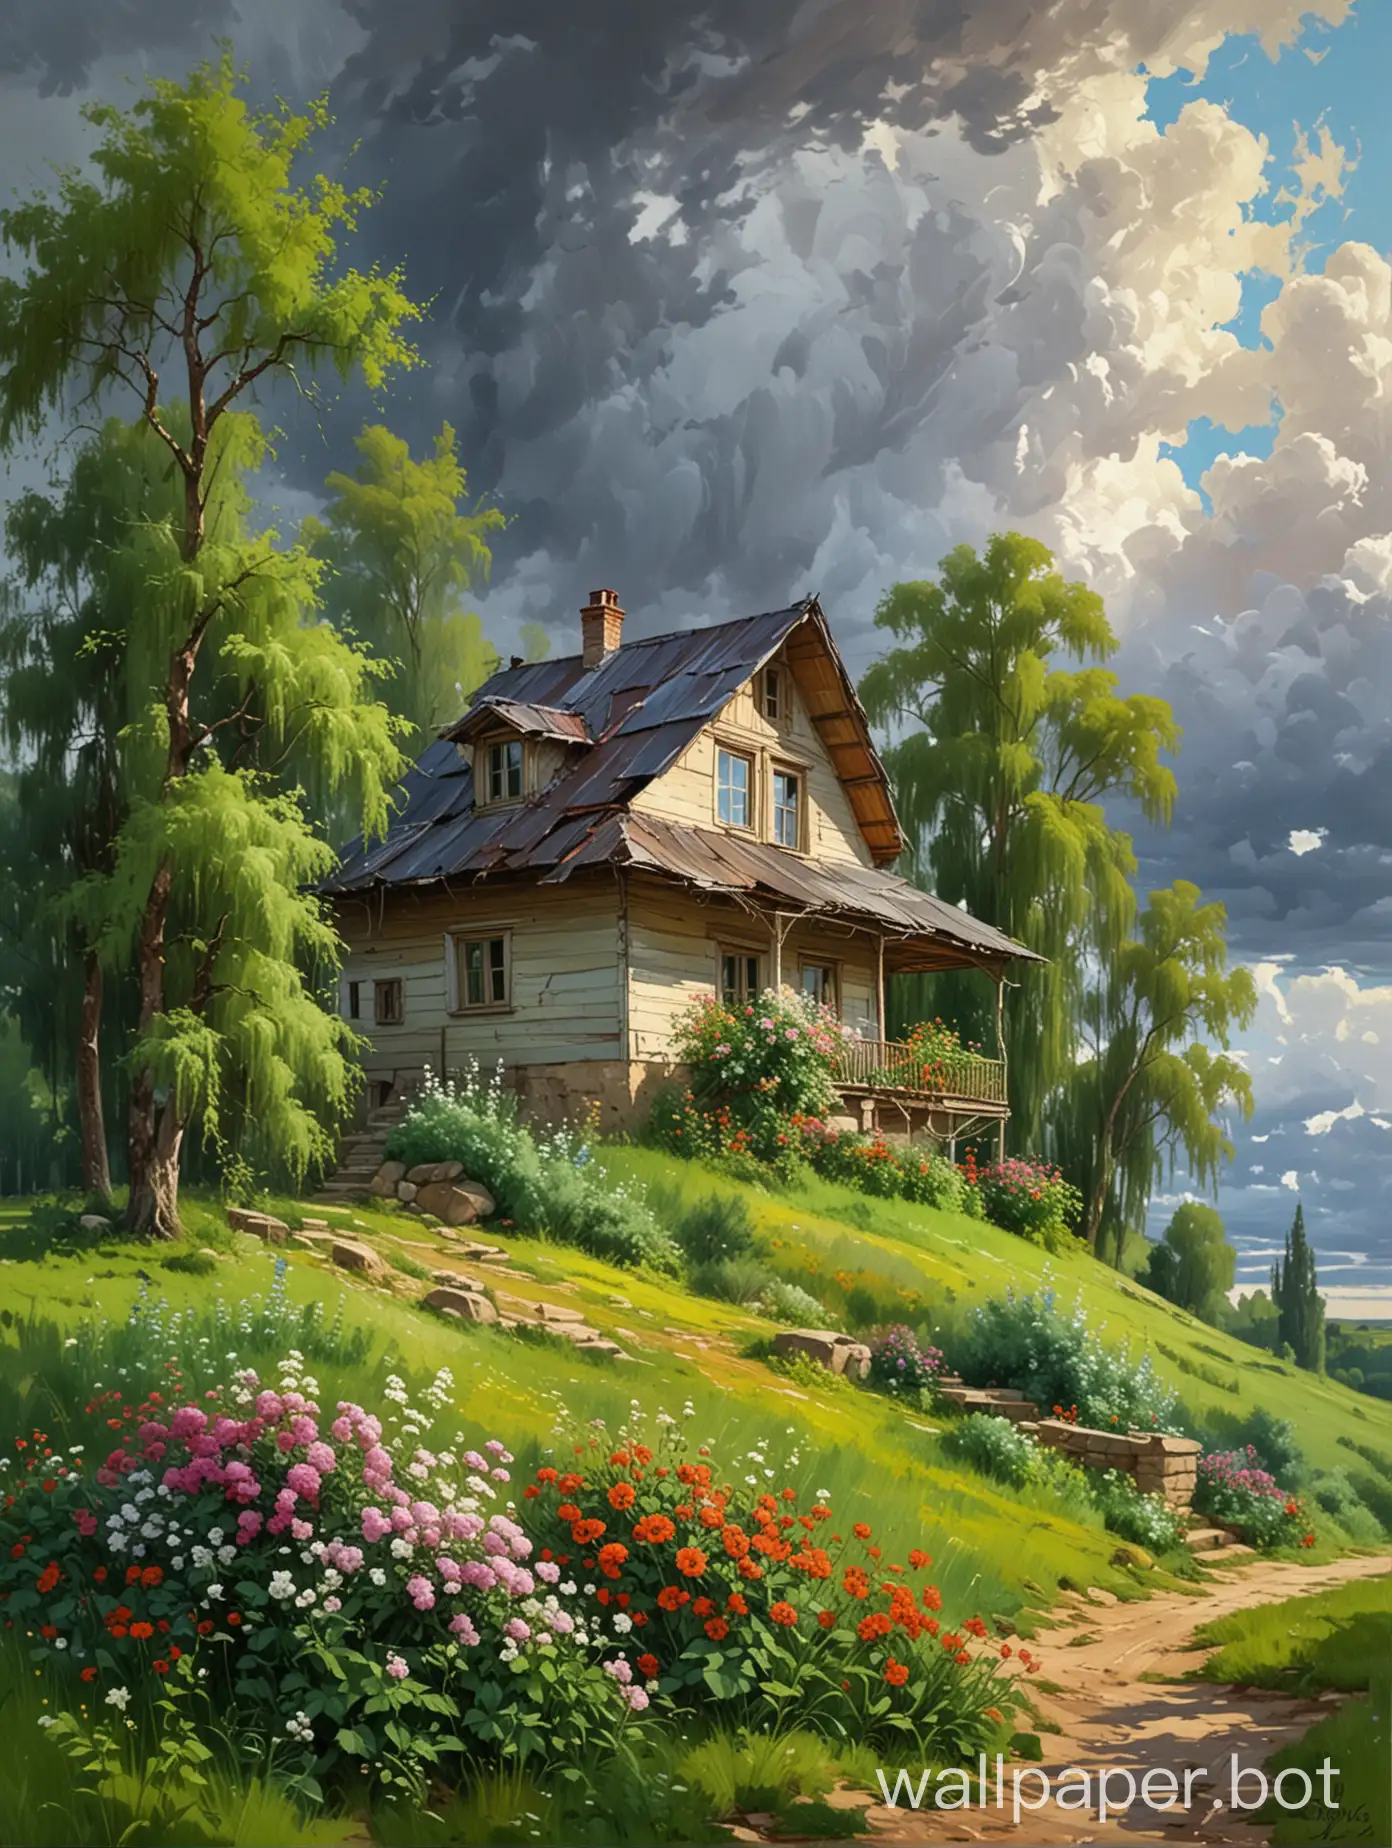 Vladimir Gusev Oil painting of dark clouds with One old house in a natural view green trees with flowers